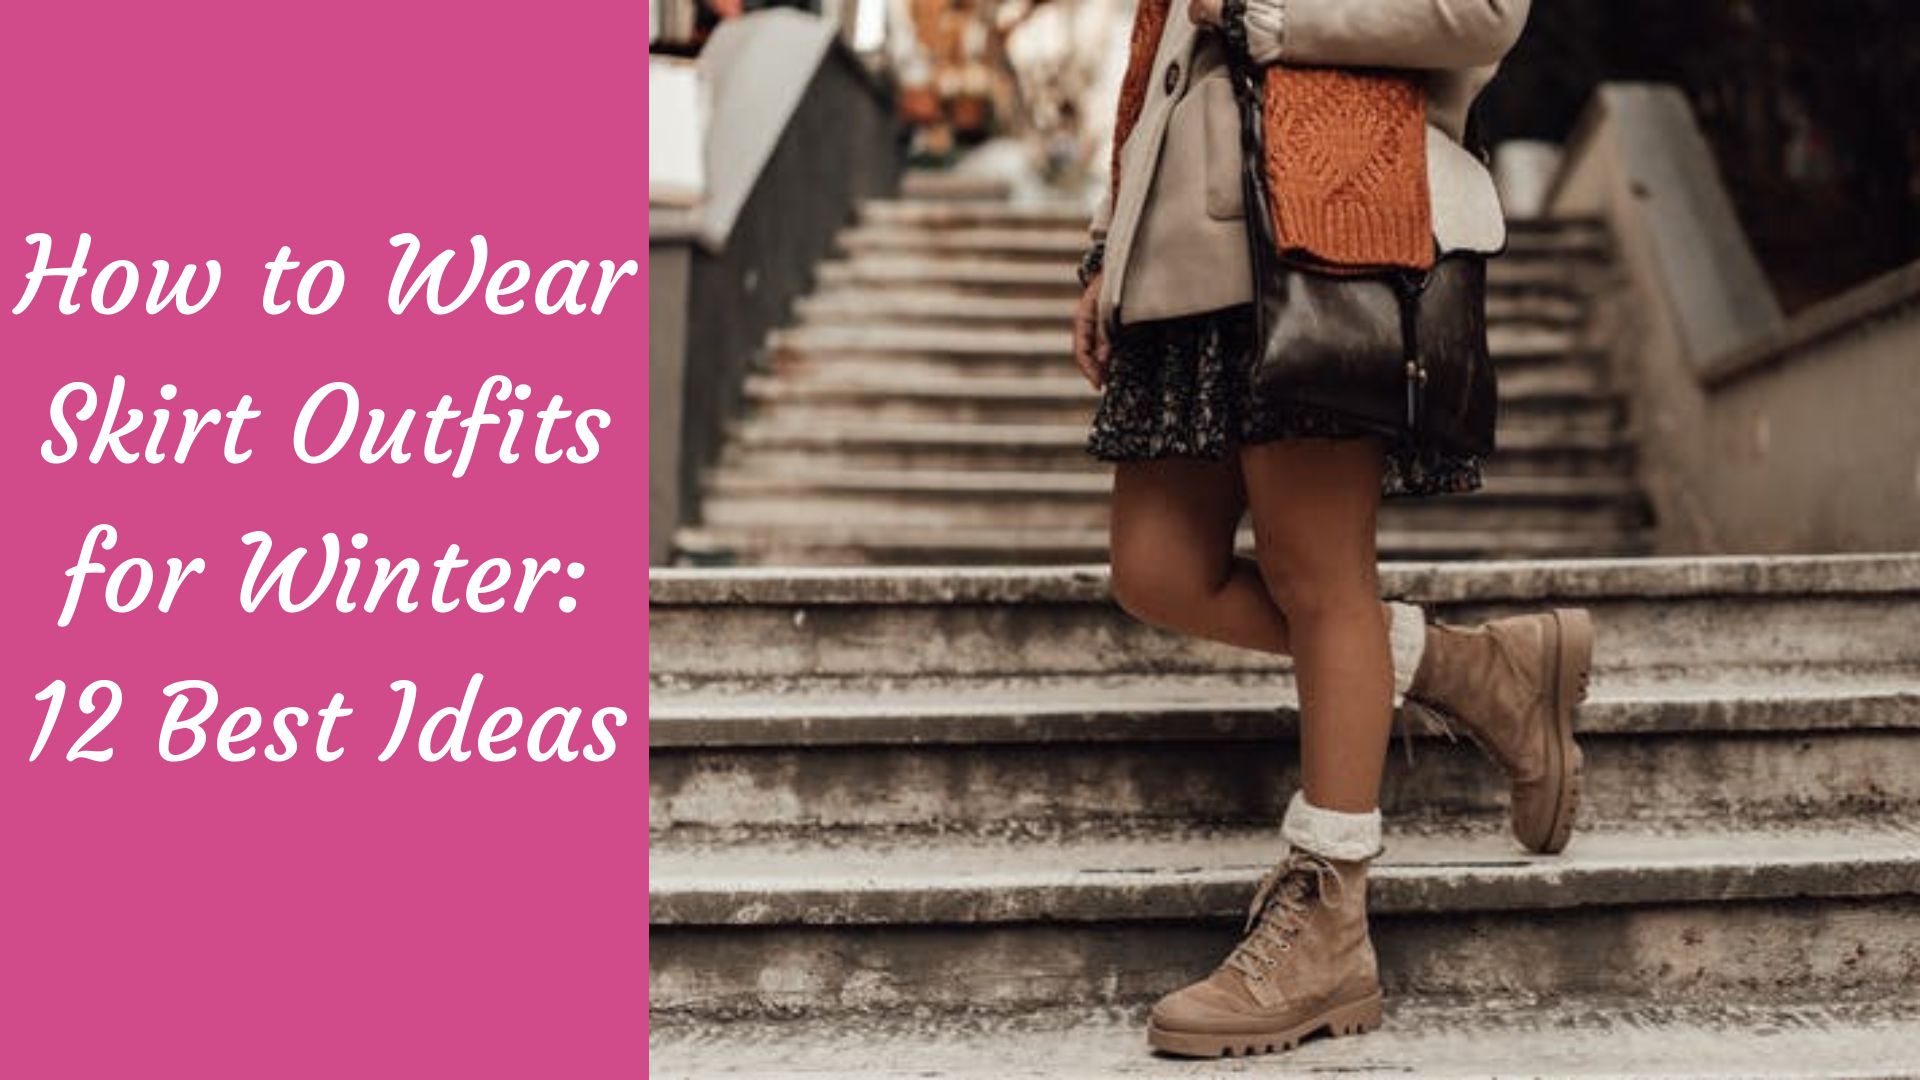 How to Wear Skirt Outfits for Winter: 12 Best Ideas